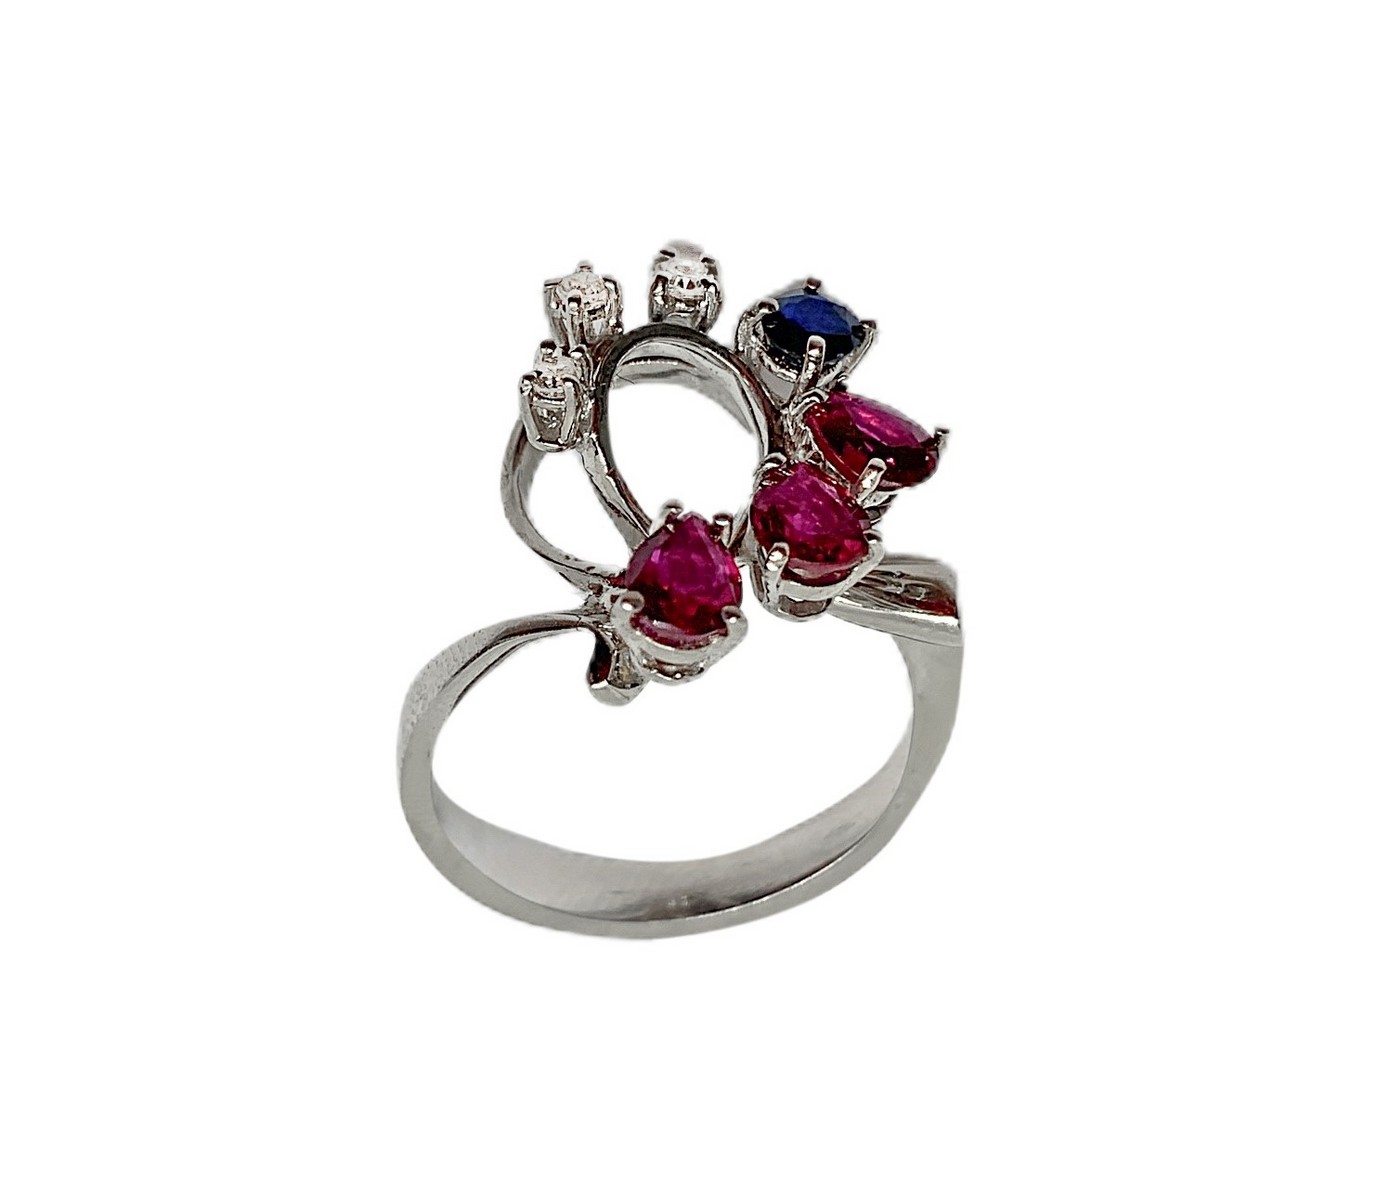 White gold ring with 3 rubies, 1 blue sapphire and 3 brilliants - Image 3 of 5